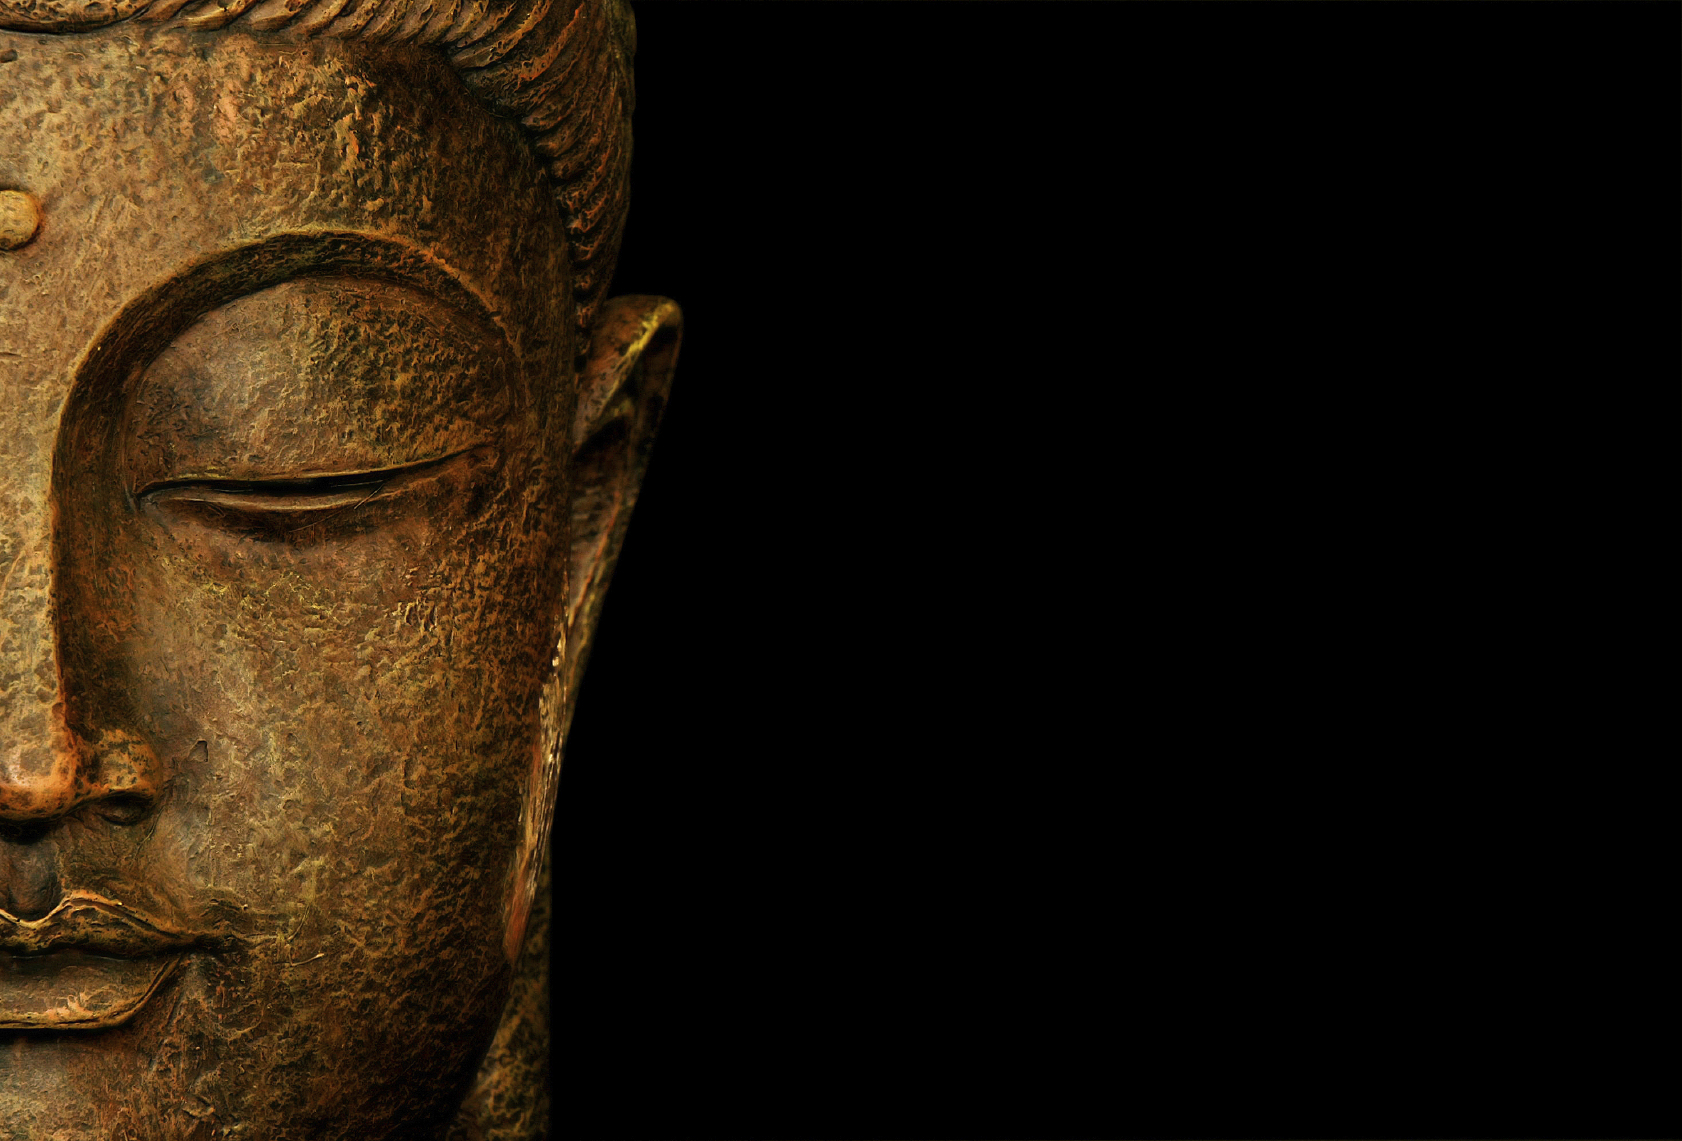 Statue representing the portrait of Buddha in meditation. Copy space.